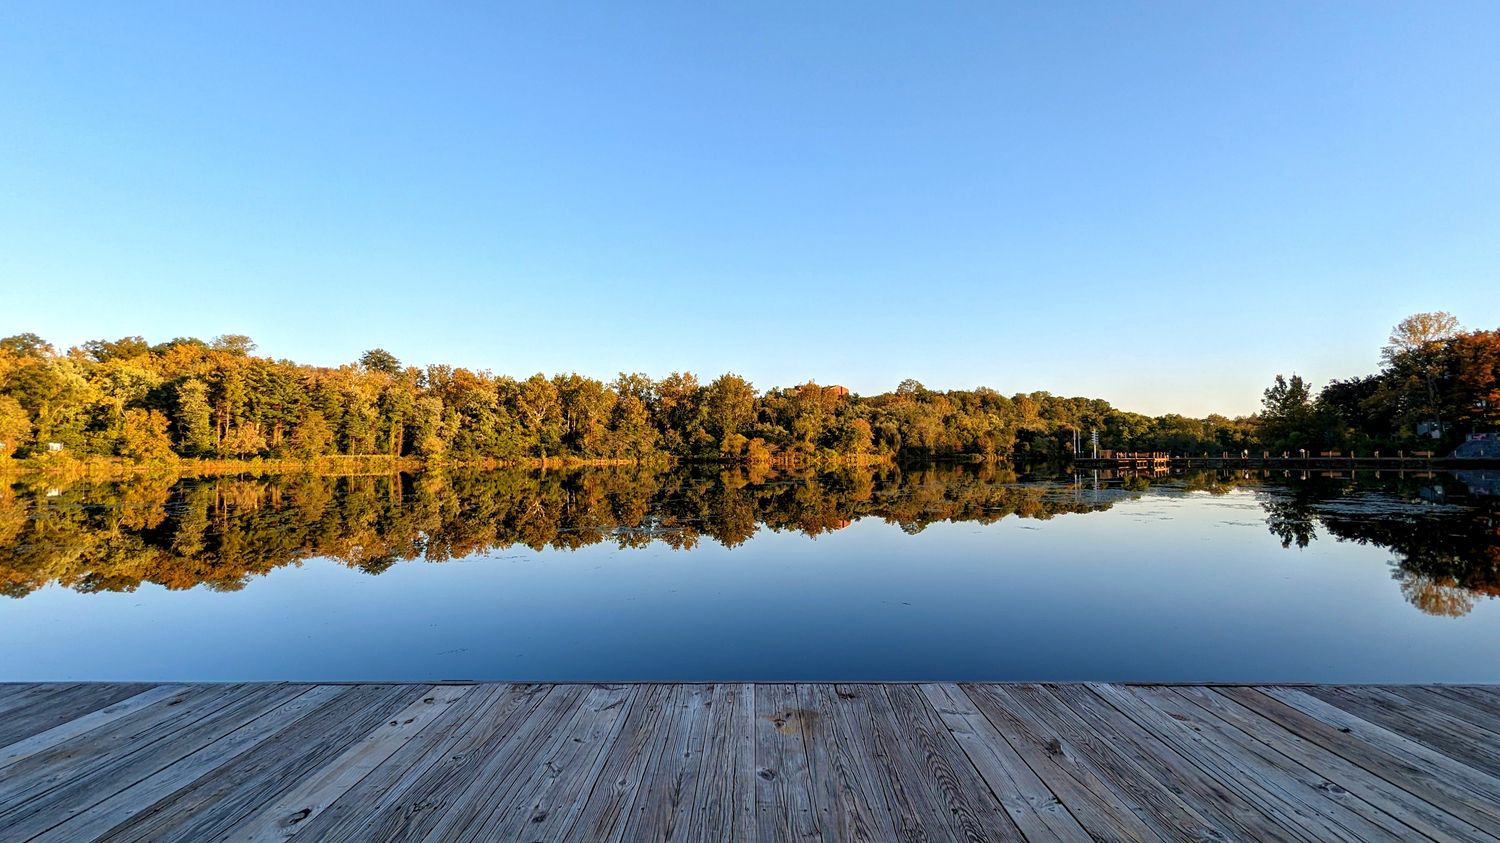 A view of Lake Kittamaqundi from the pier and out to the trees in Columbia, Maryland